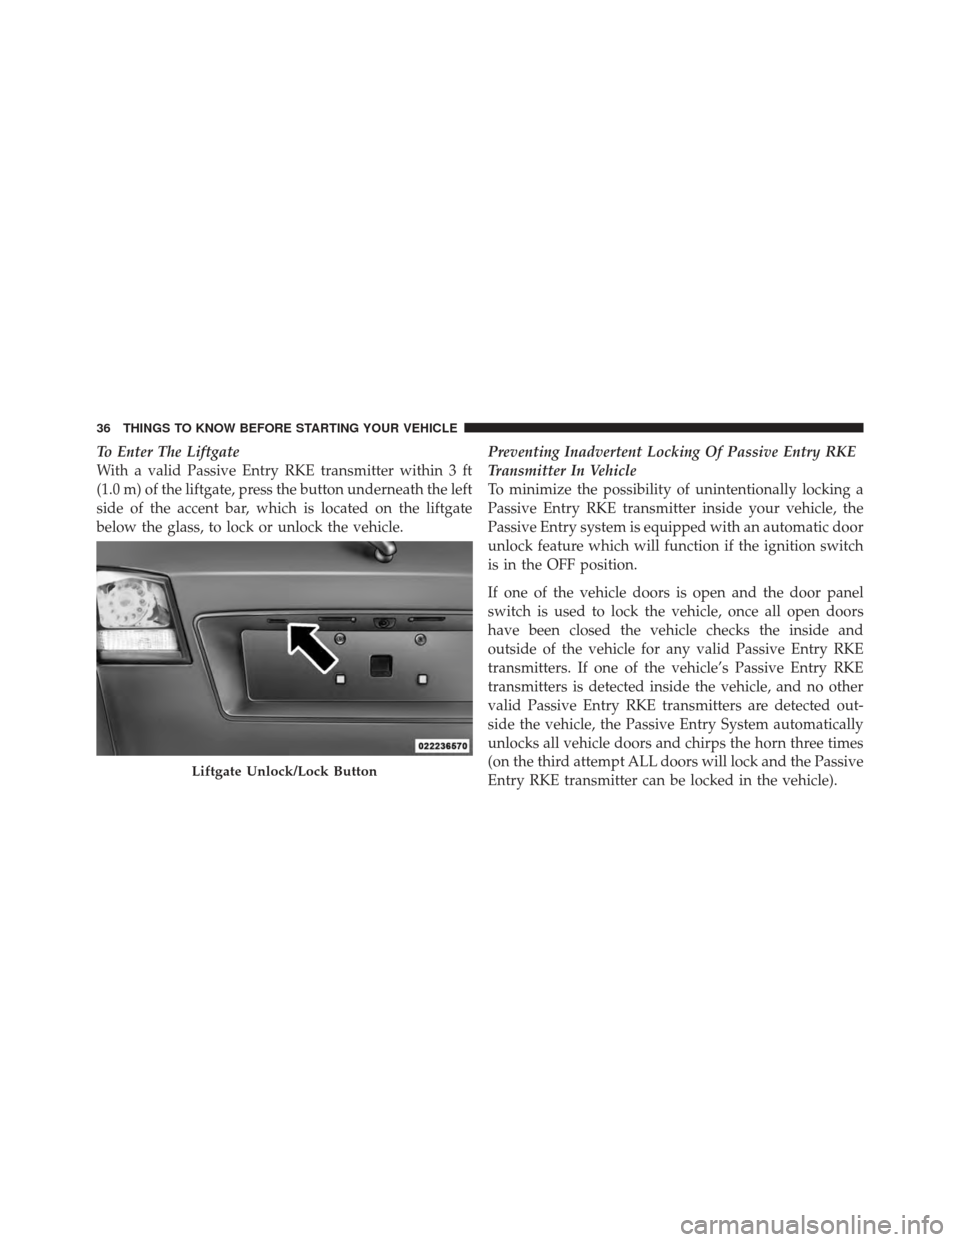 DODGE JOURNEY 2011 1.G Owners Manual To Enter The Liftgate
With a valid Passive Entry RKE transmitter within 3 ft
(1.0 m) of the liftgate, press the button underneath the left
side of the accent bar, which is located on the liftgate
belo